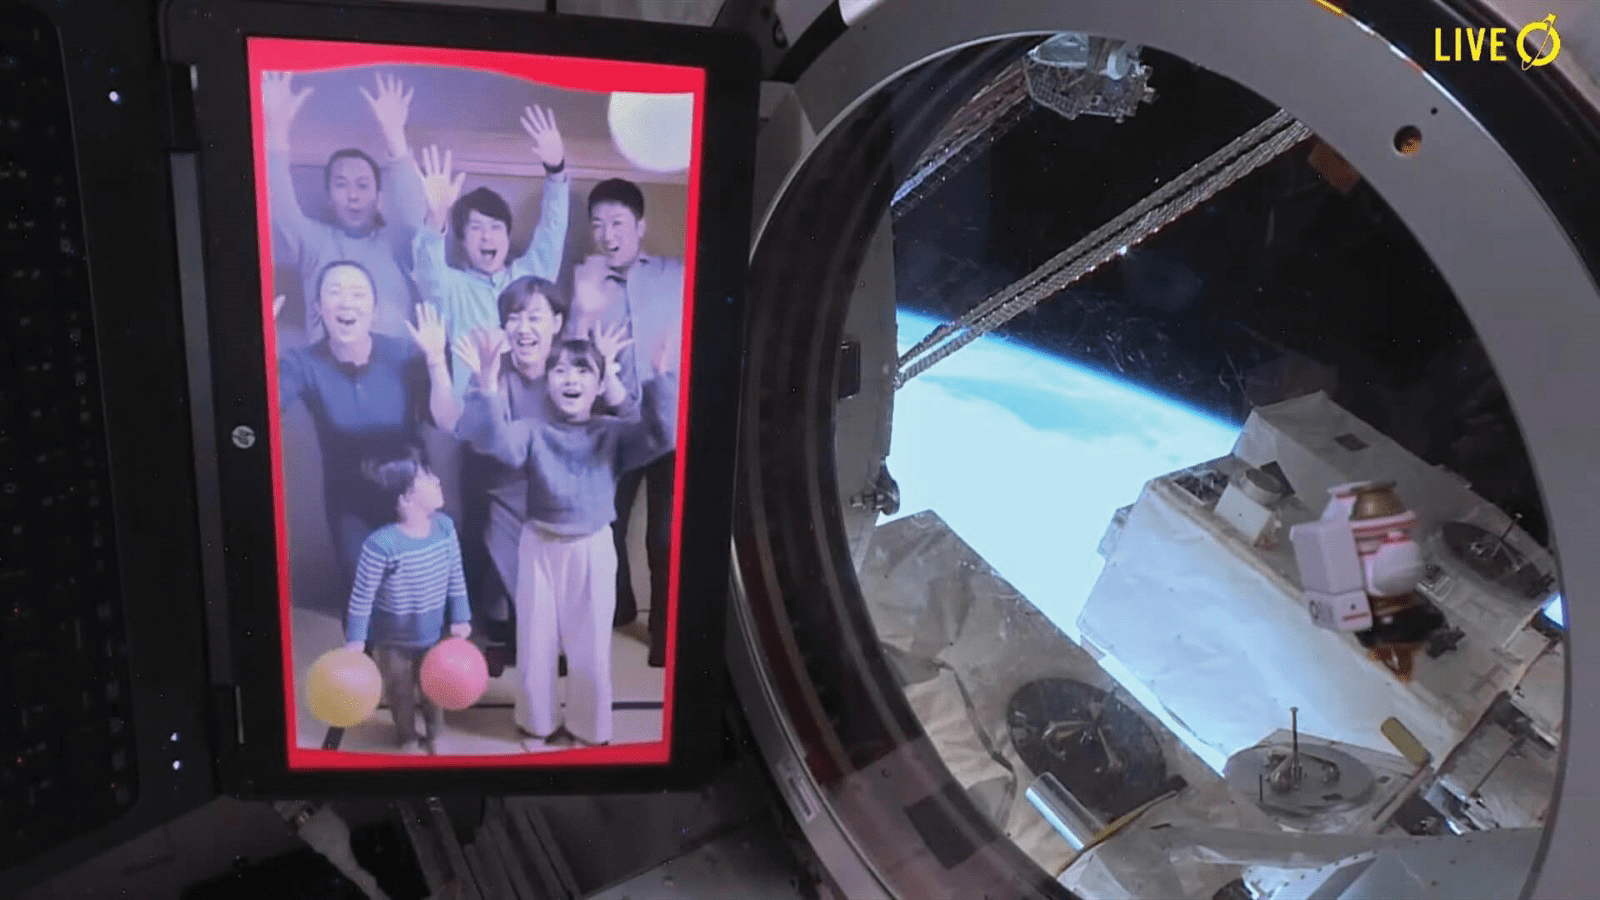 image of a family portrait shown in a tablet inside the space station